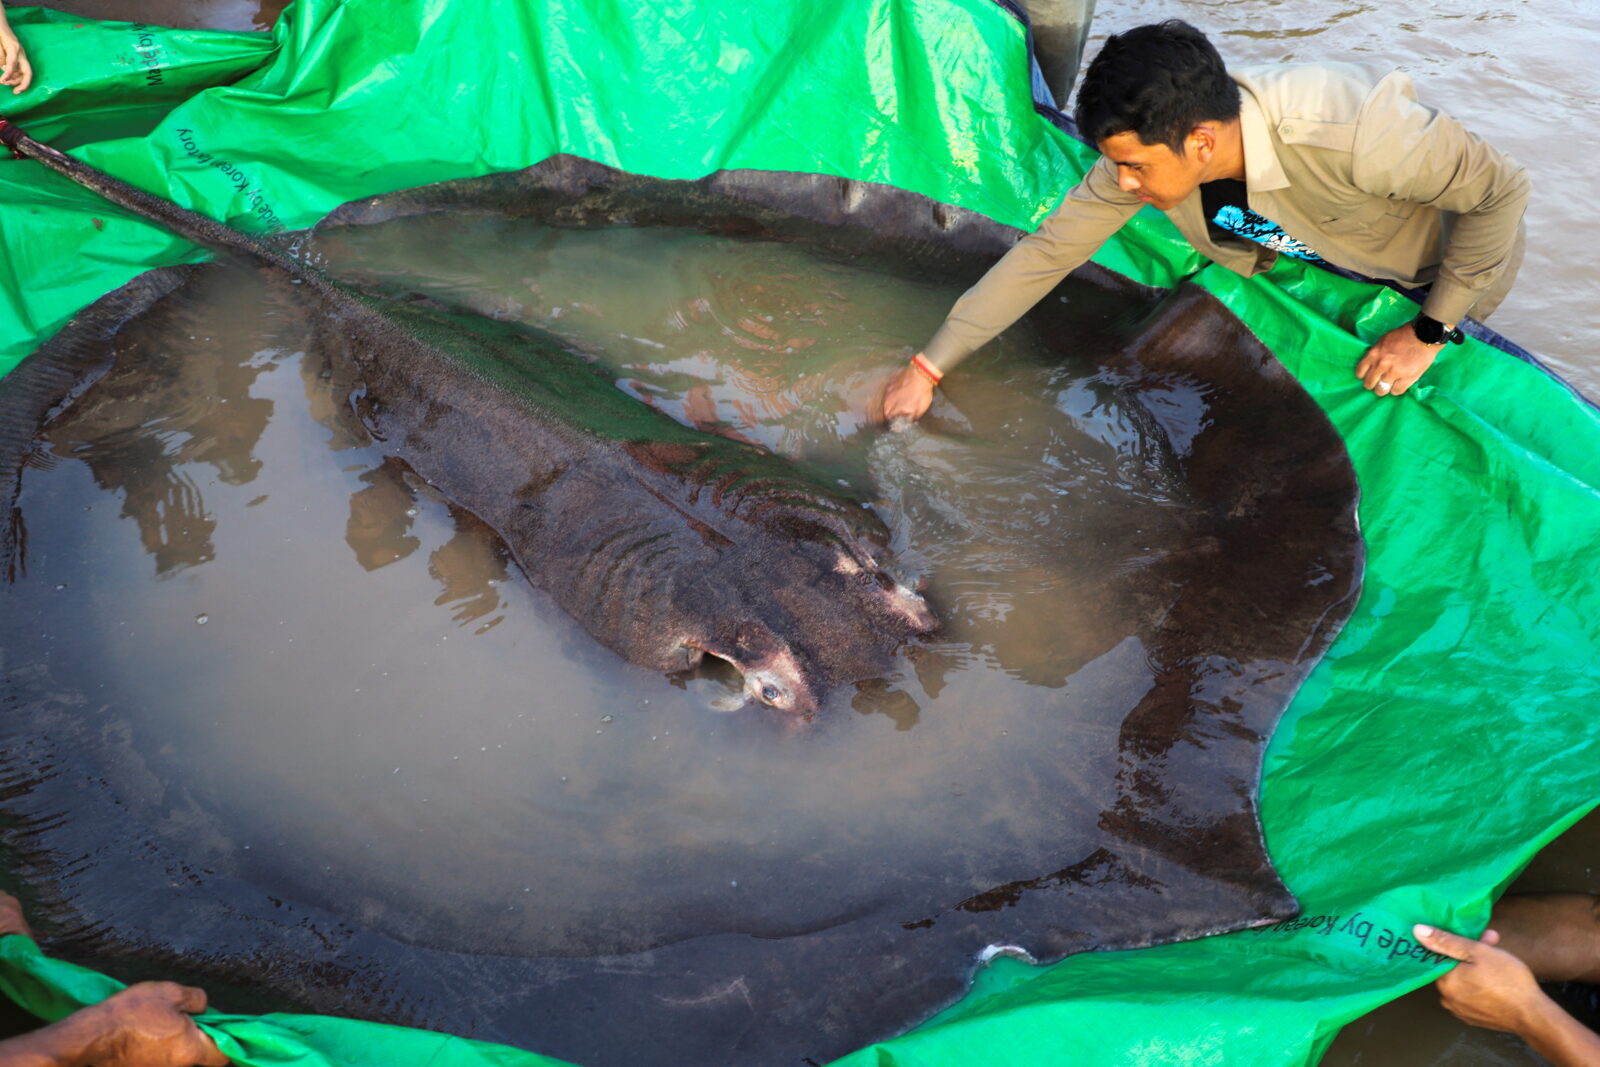 Scientists say they found world’s largest freshwater fish in Mekong